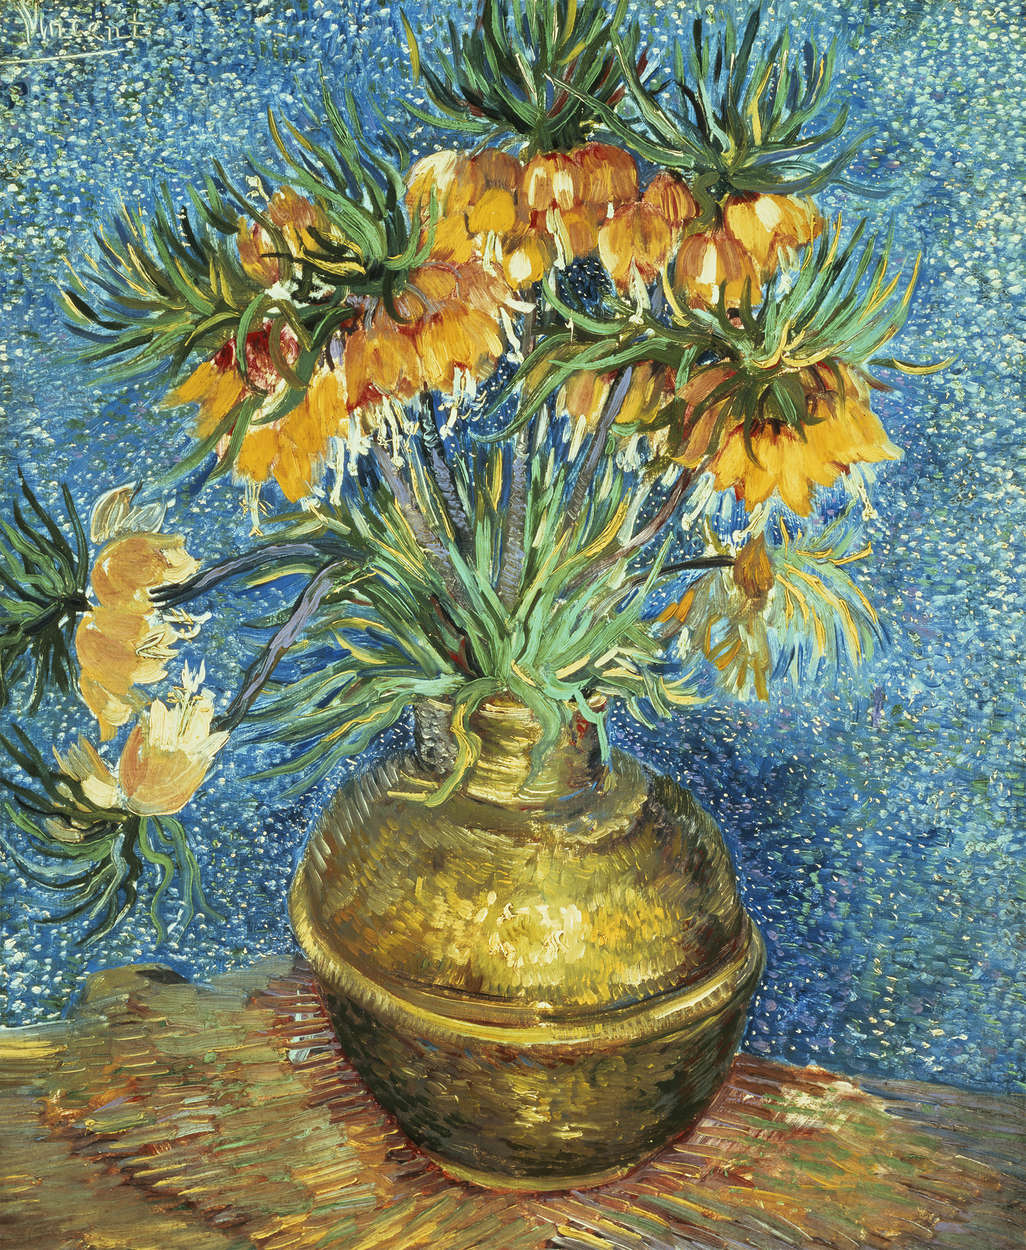             Photo wallpaper "Fritillaria, imperial crown in a copper vase " by Vincent van Gogh
        